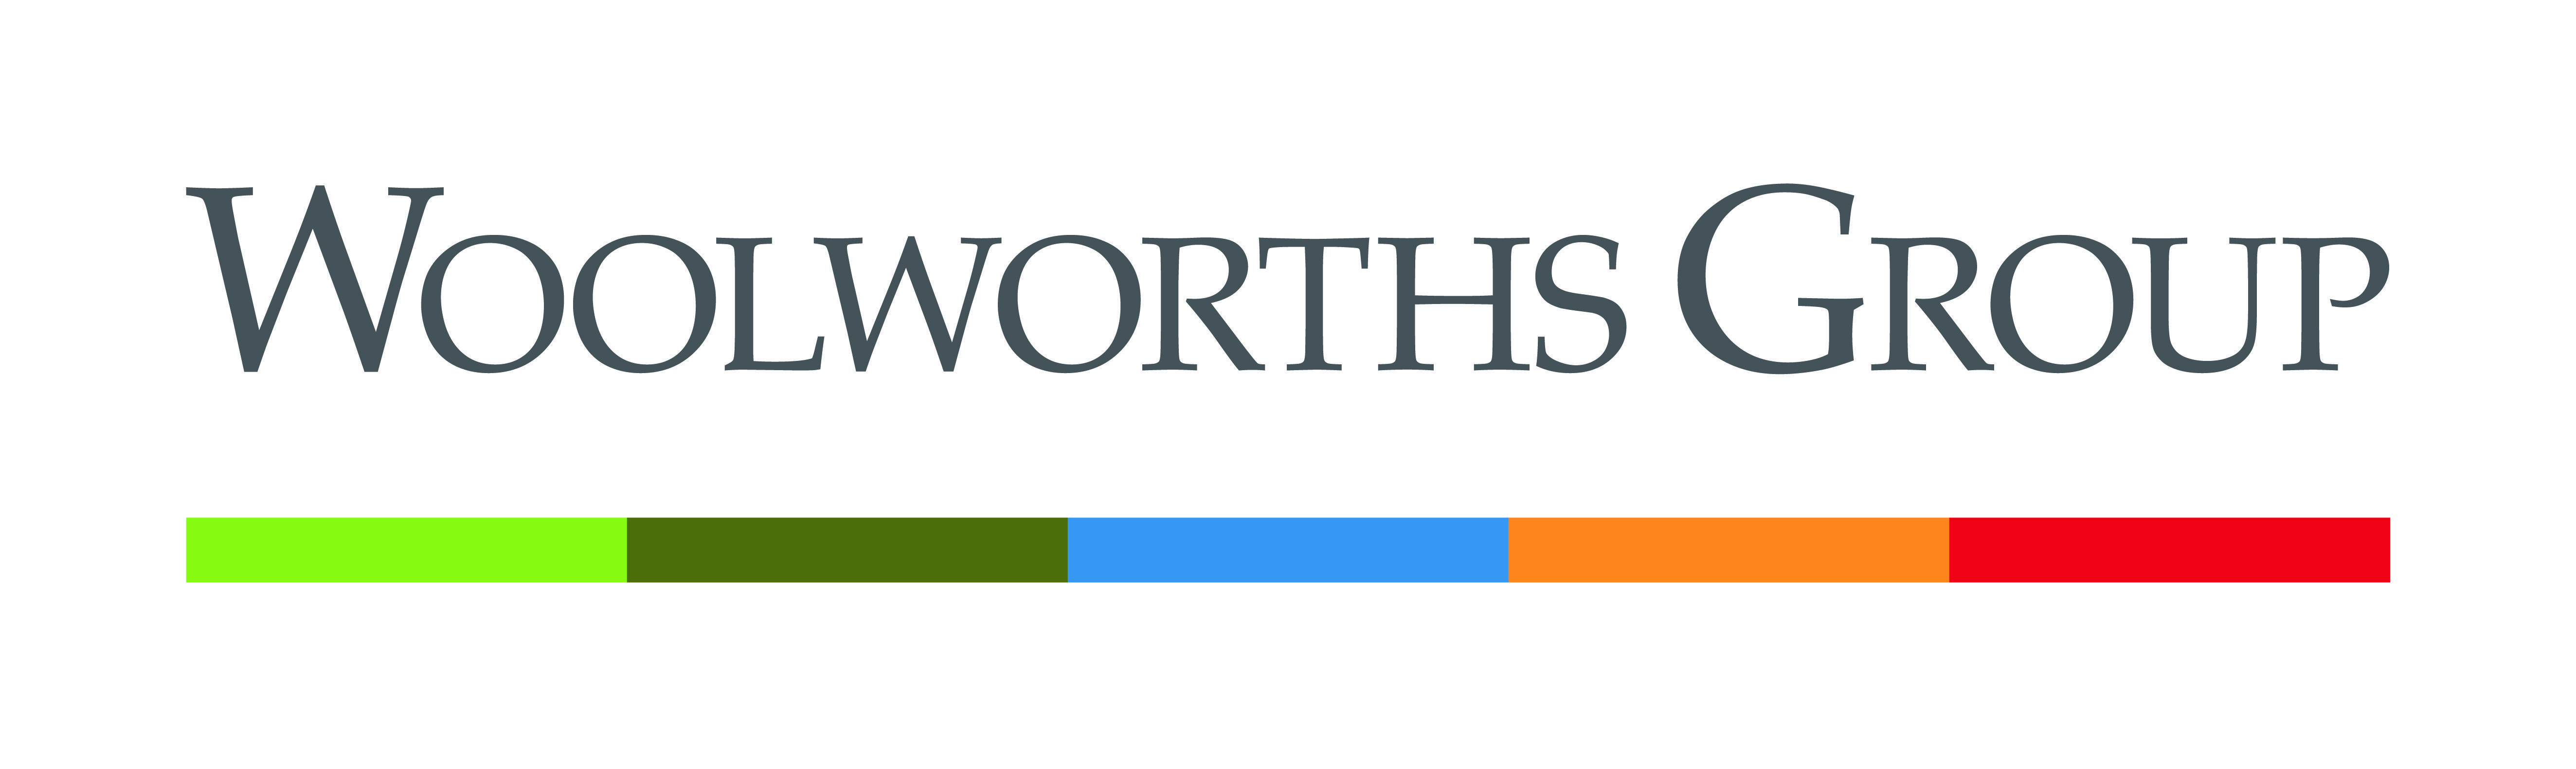 Woolworths Australia Logo - Woolworths Group employment opportunities